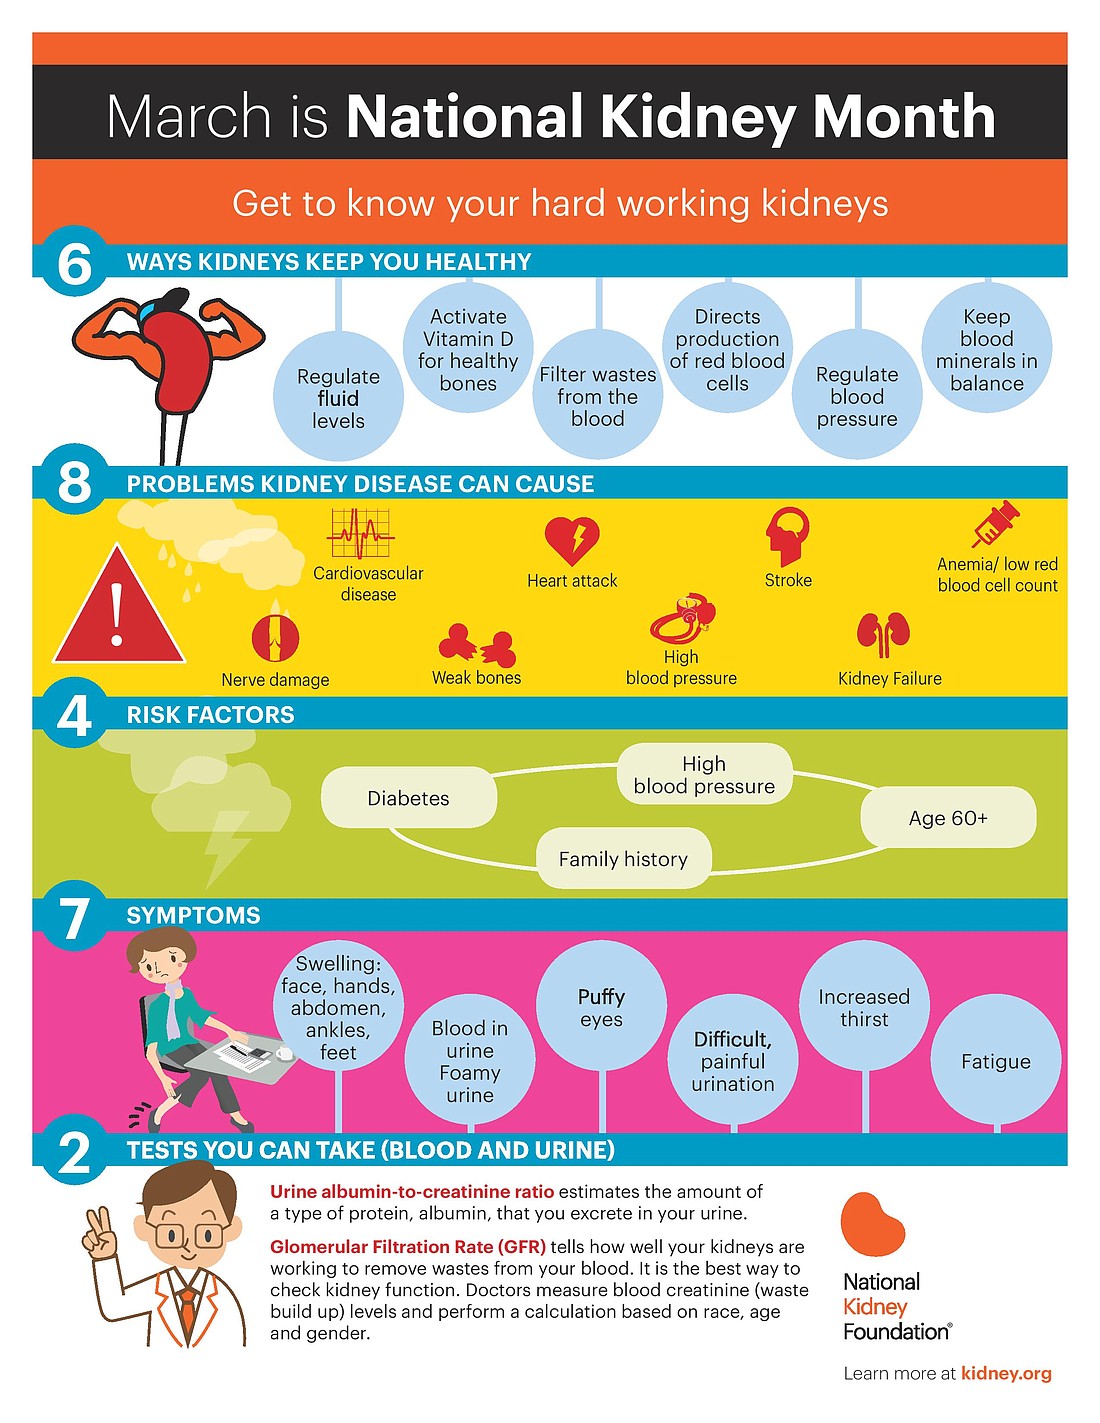 March is National Kidney Month, a time to learn about kidney health.